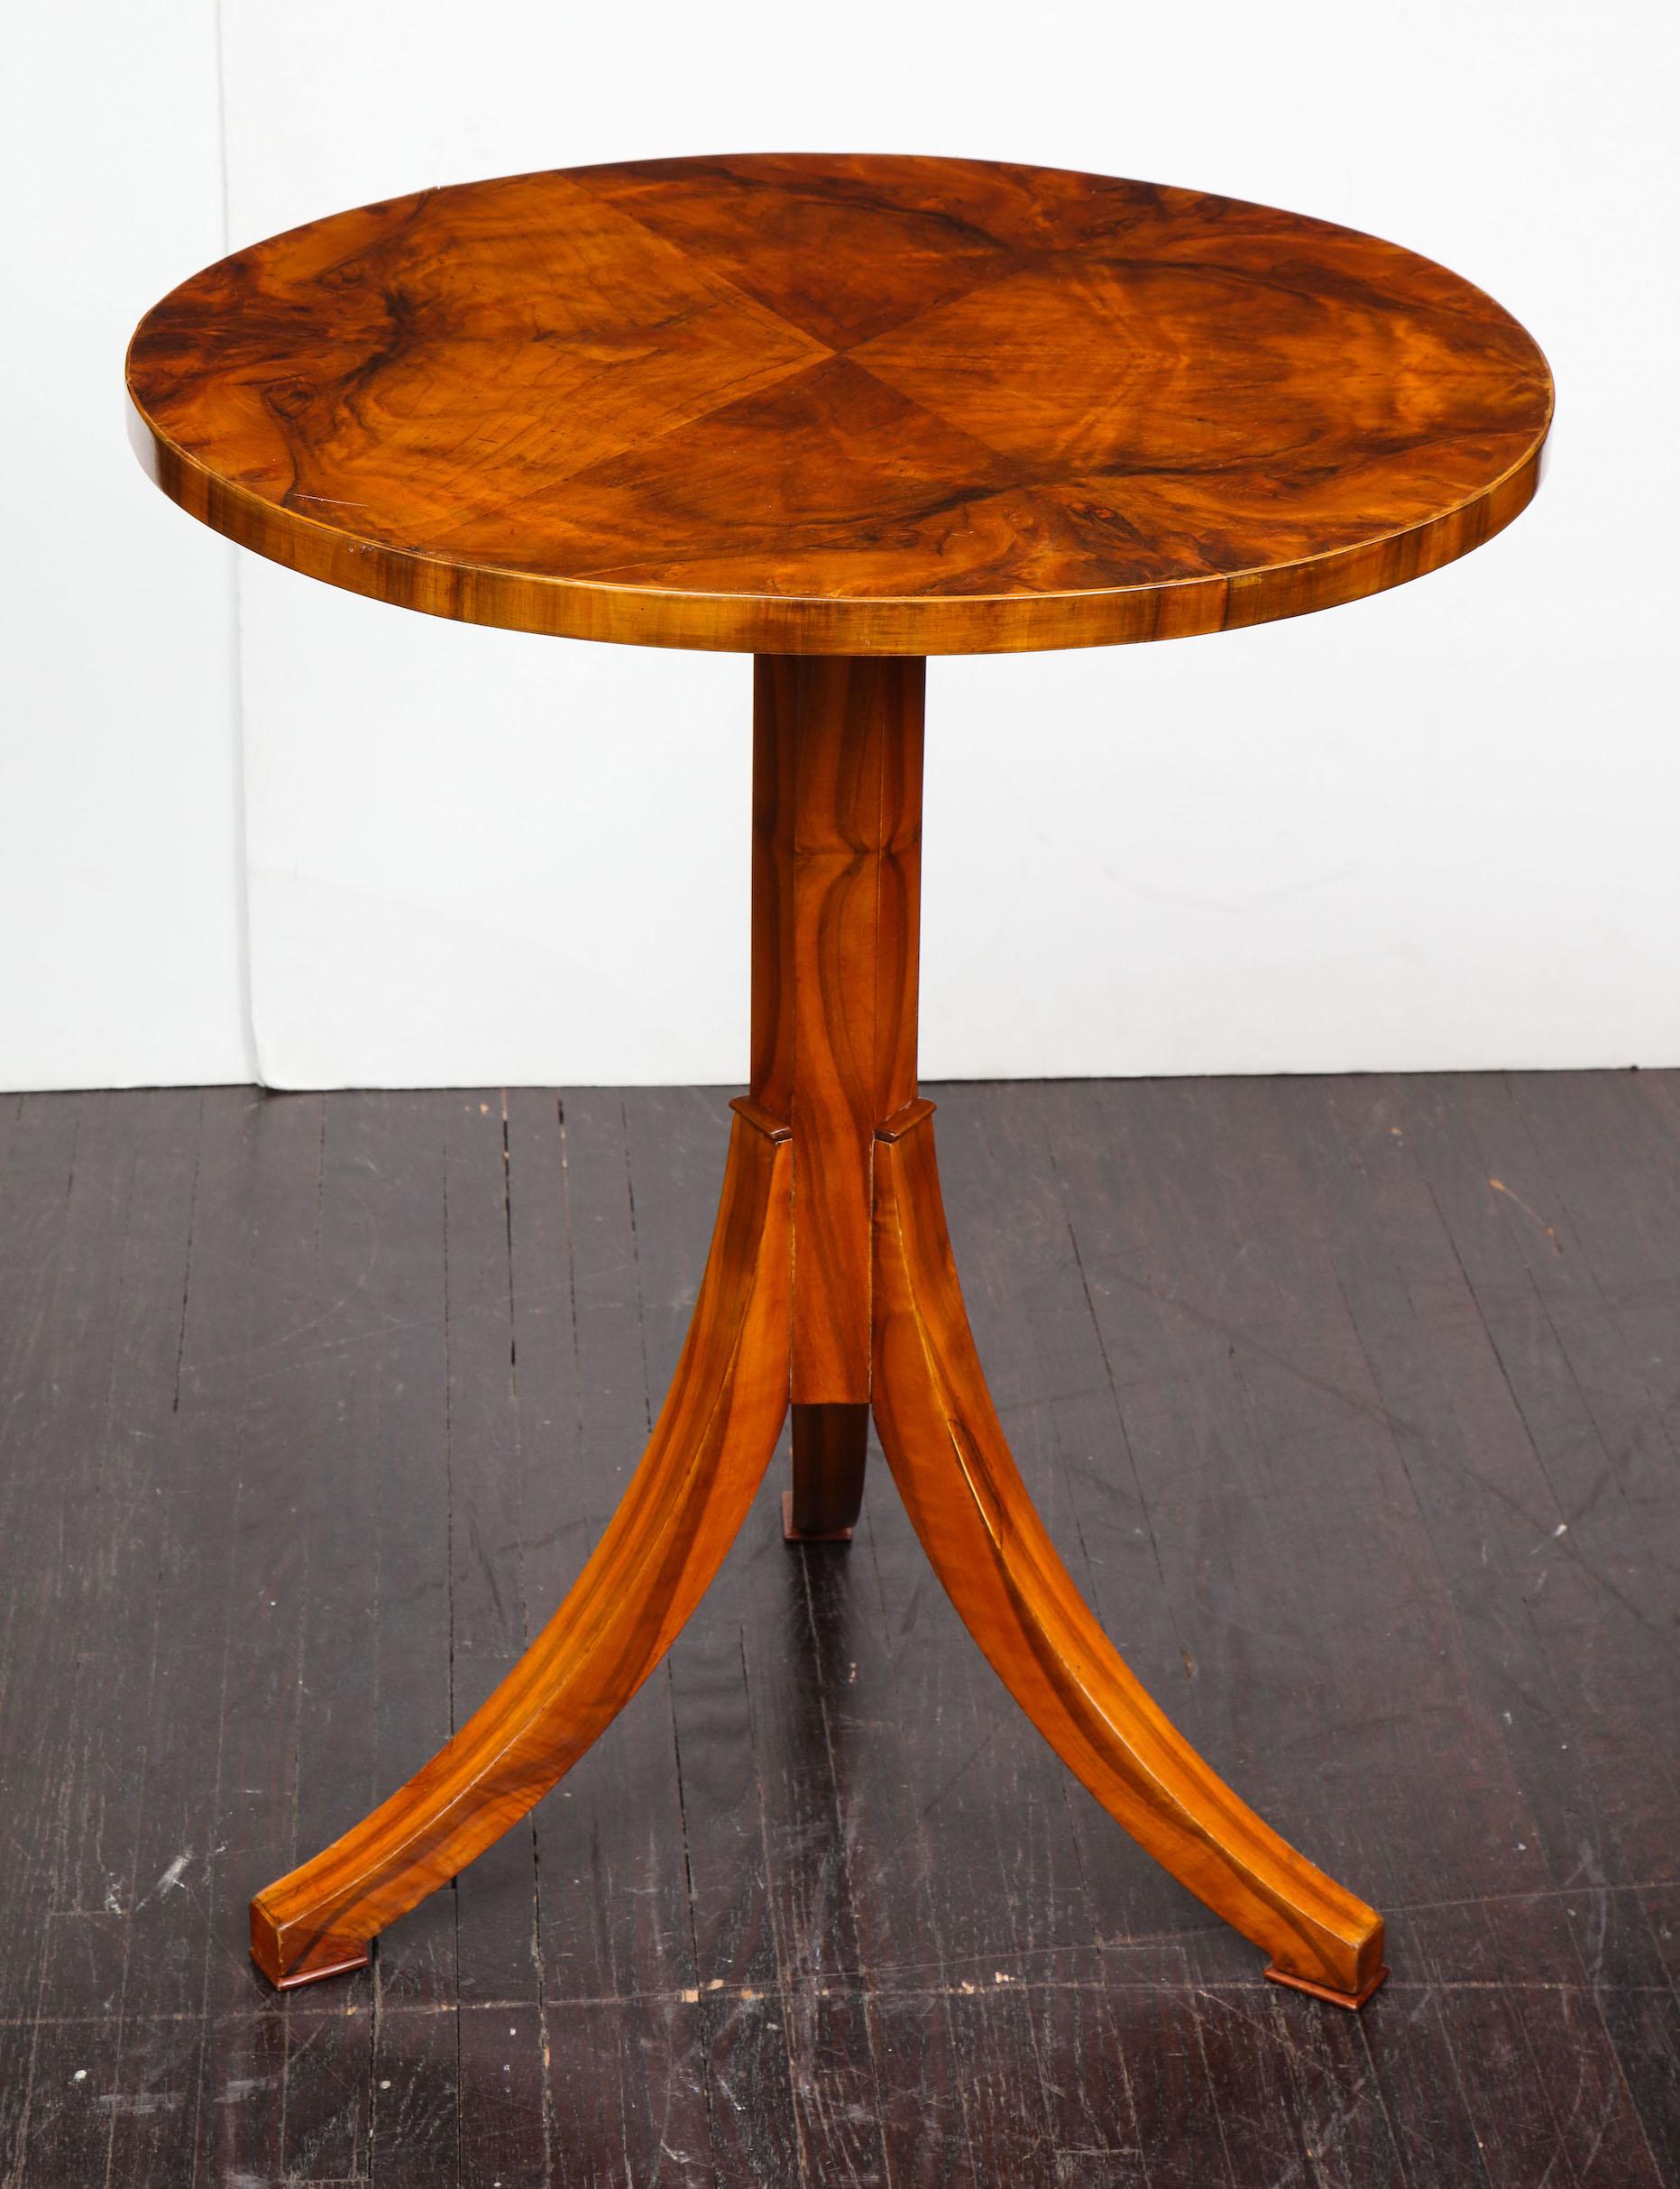 Biedermeier tripod table. The table is in good condition and shows some fine scratches and cosmetic wear. Restoration quote can be provided upon request.